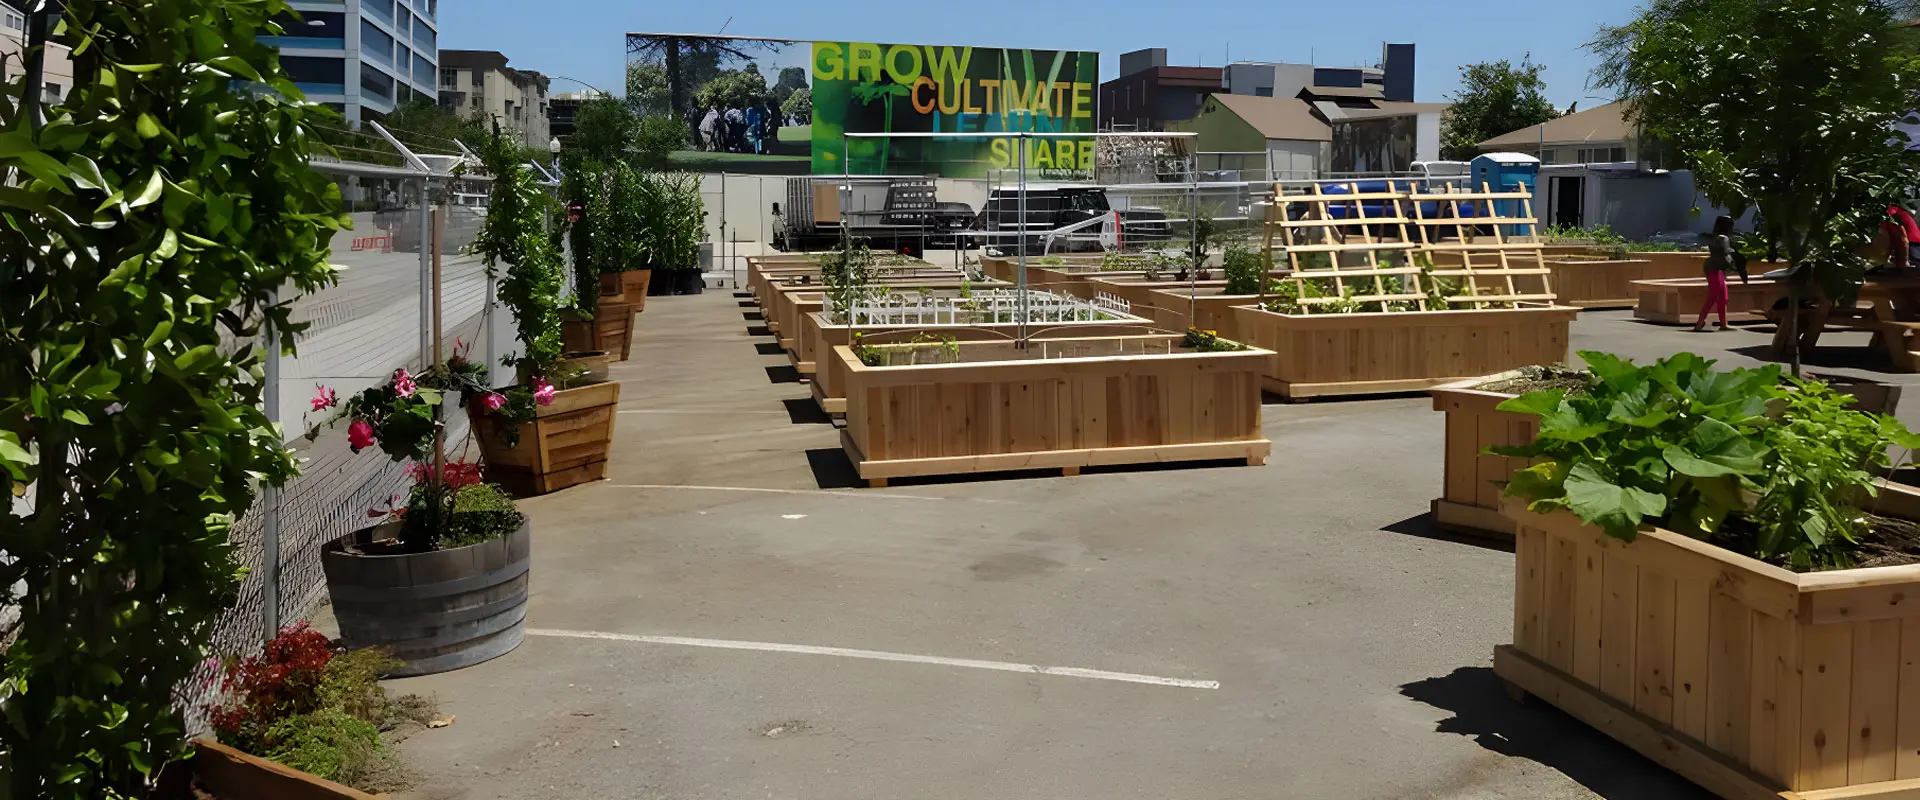 A row of wooden planters in a parking lot.